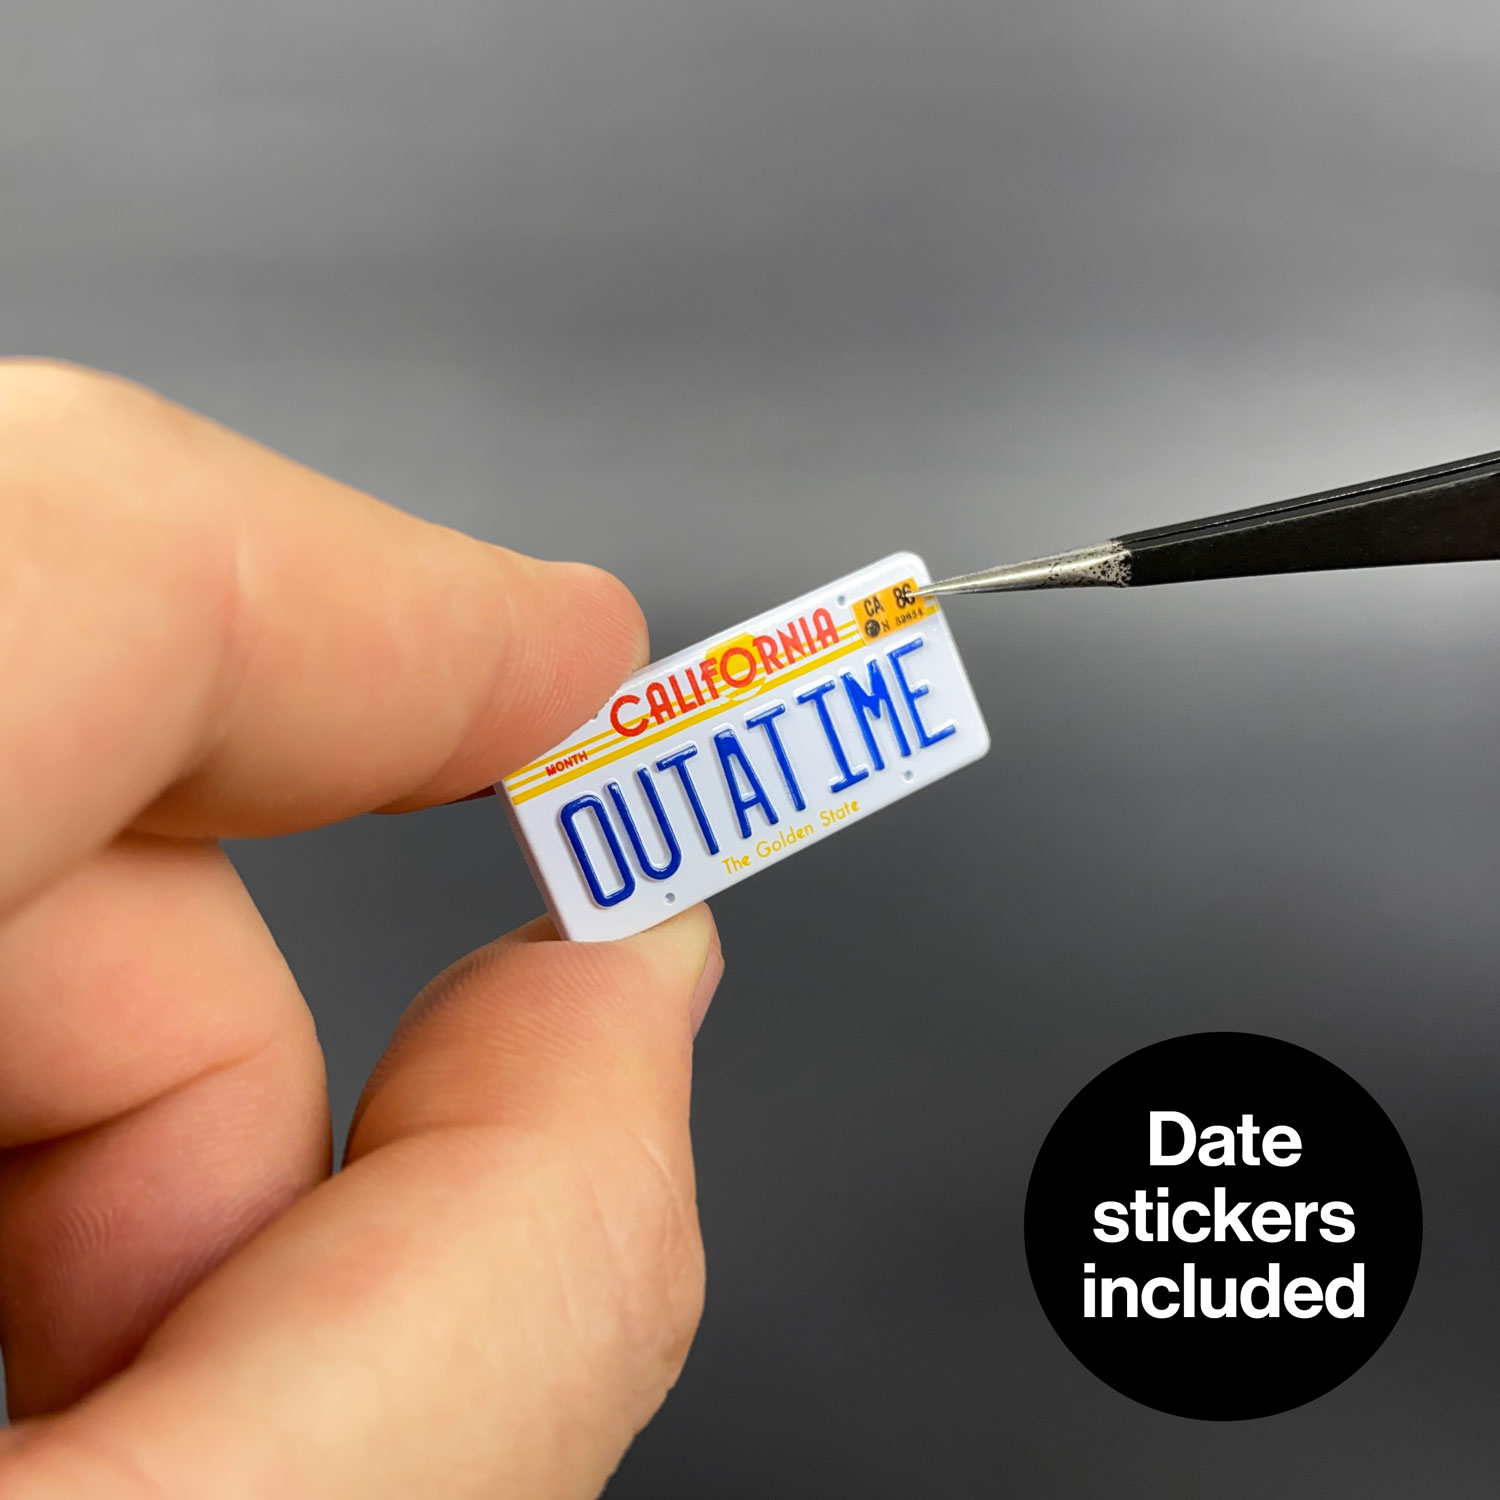 Date stickers included with OUTATIME die-cast licence plate